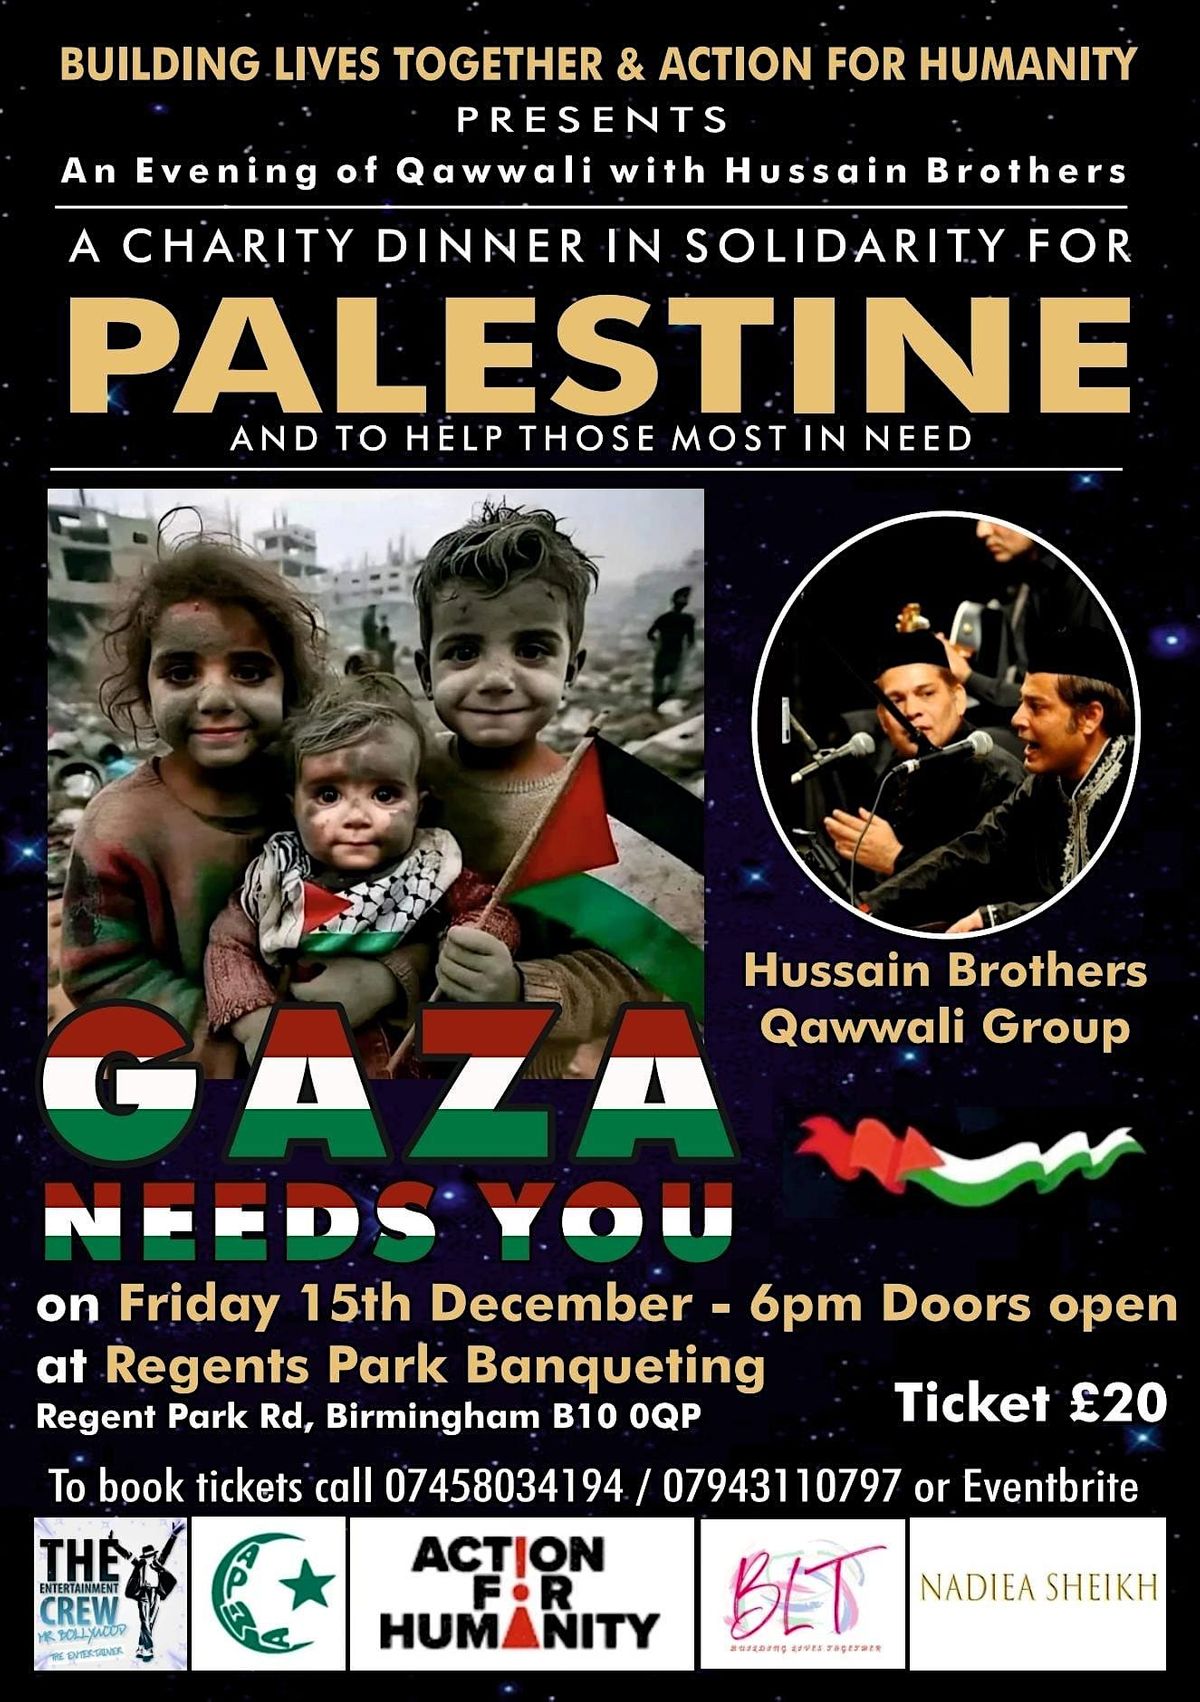 An Evening of Qawali with Hussain Brothers  for Gaza